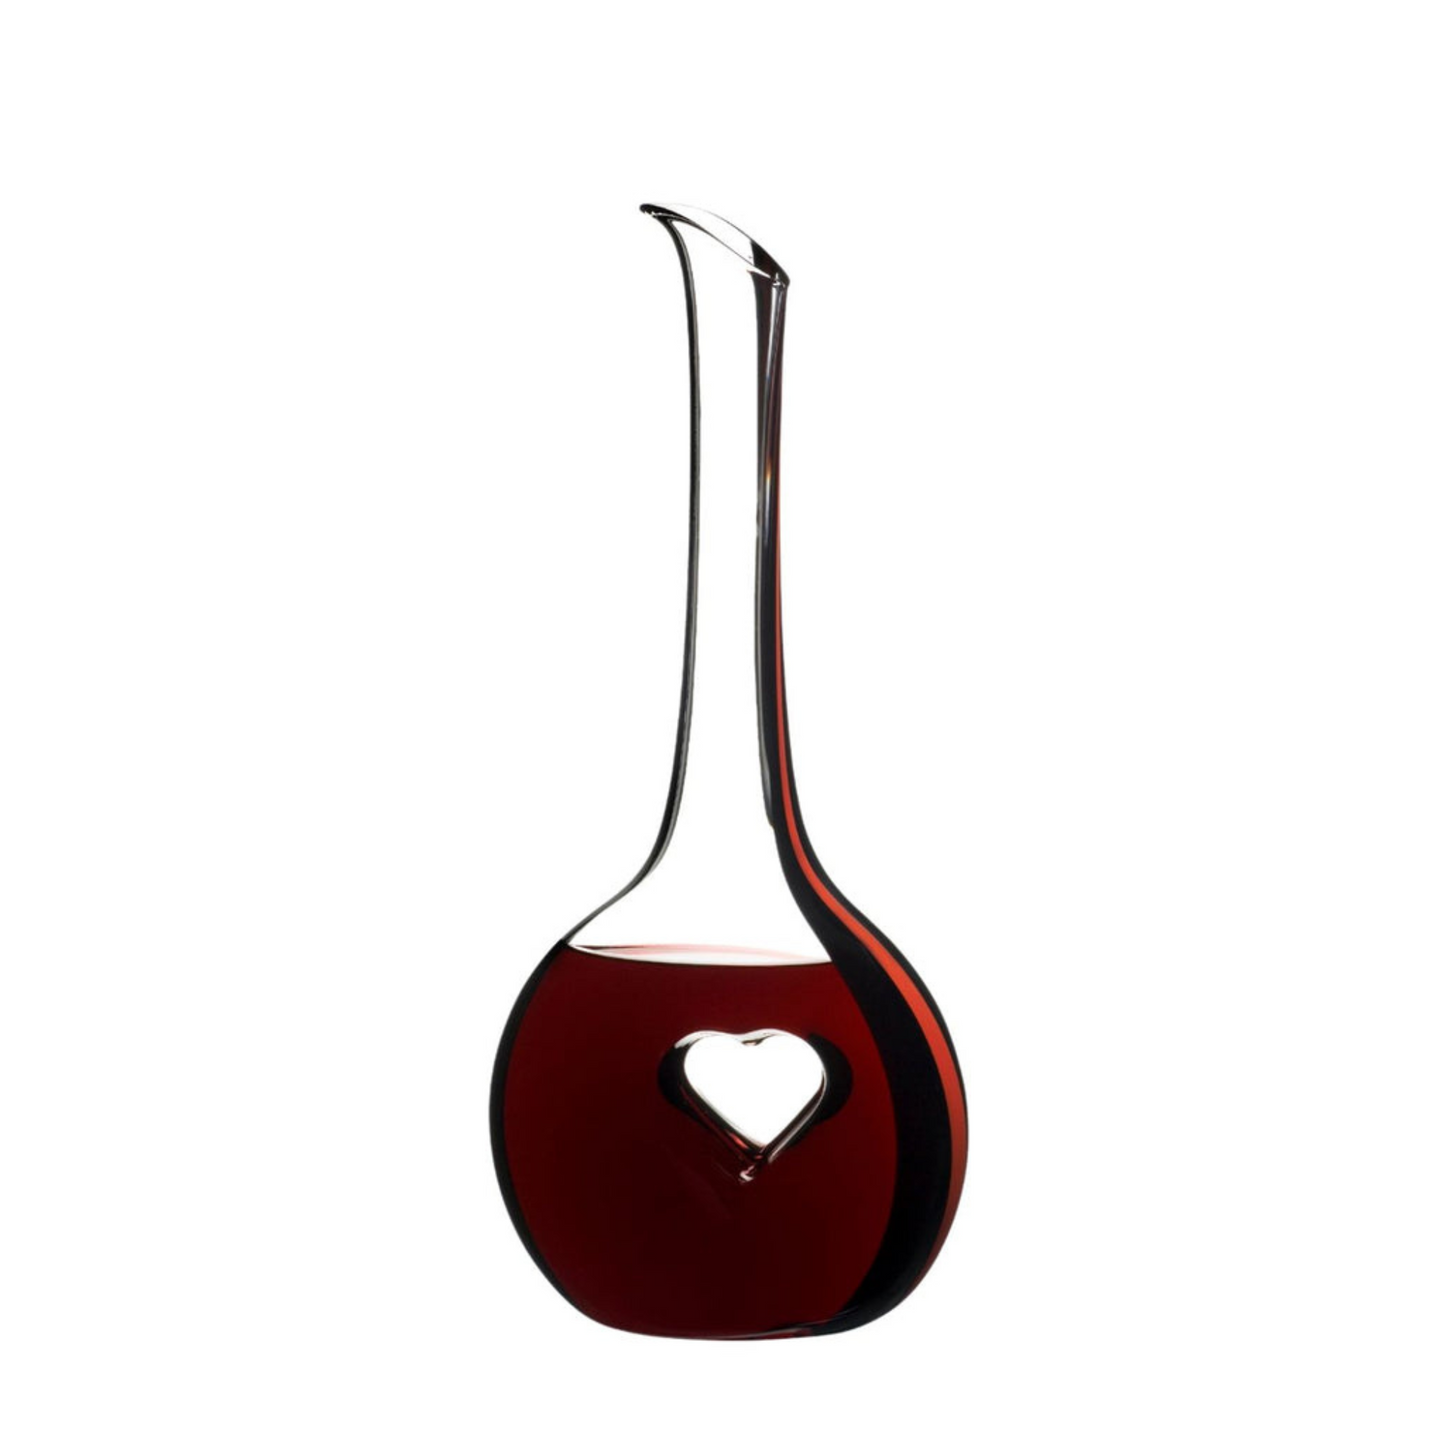 Riedel Black Tie Bliss Decanter in Red